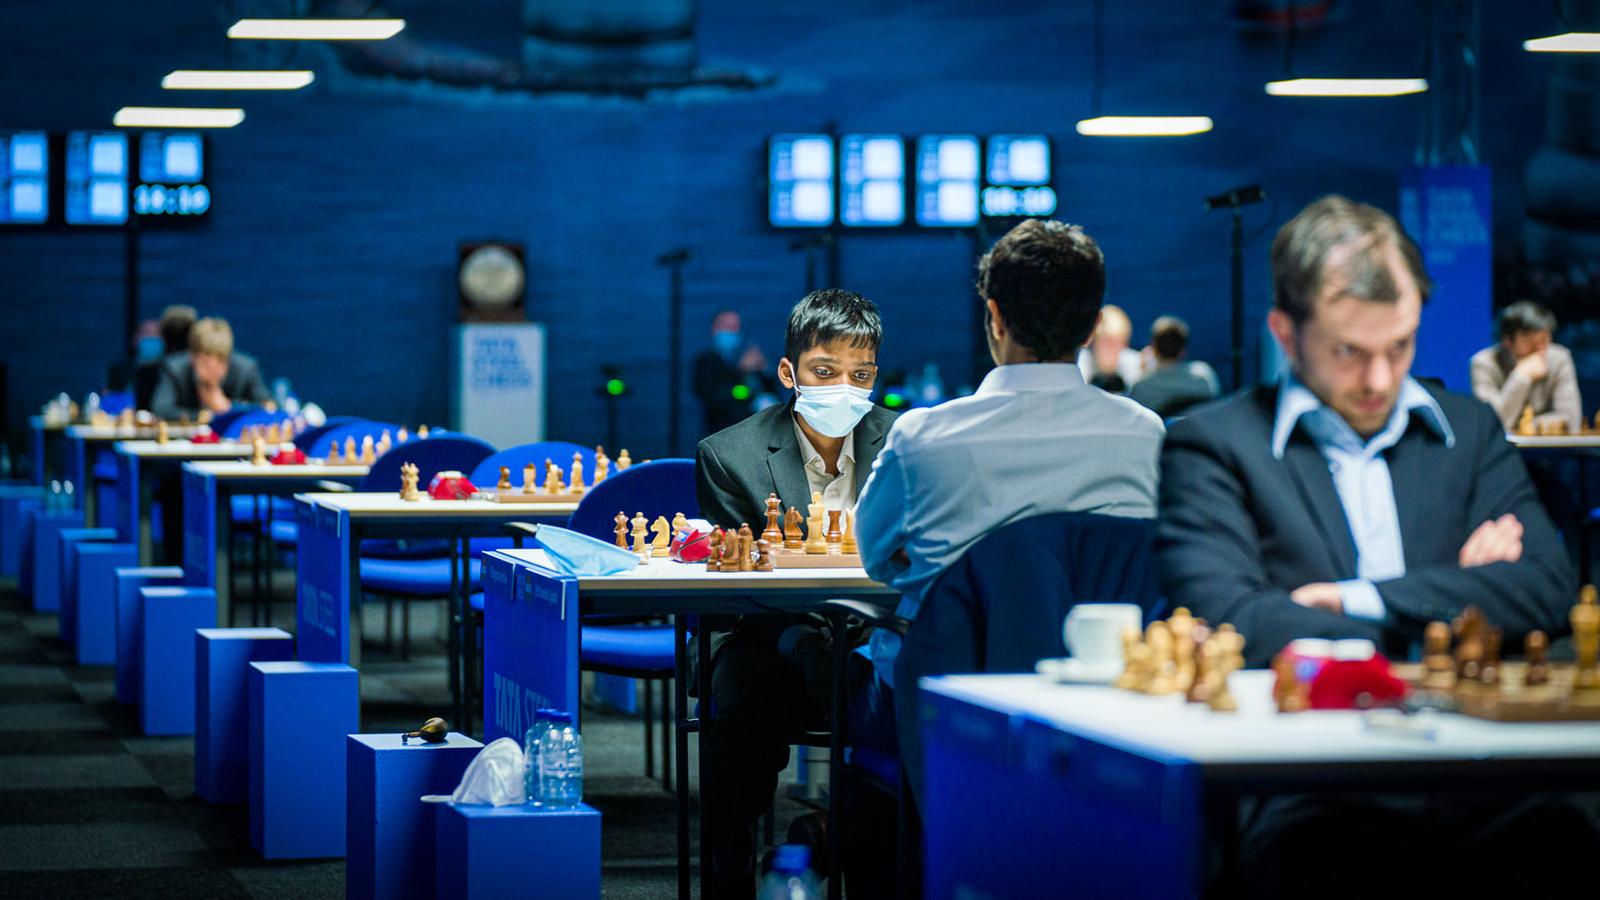 Tata Steel Chess on X: The registration for the 2024 Tata Steel Chess  Amateur Tournaments is open! Claim your spot now to play next to the worlds  best chess players!♟️💙 Check